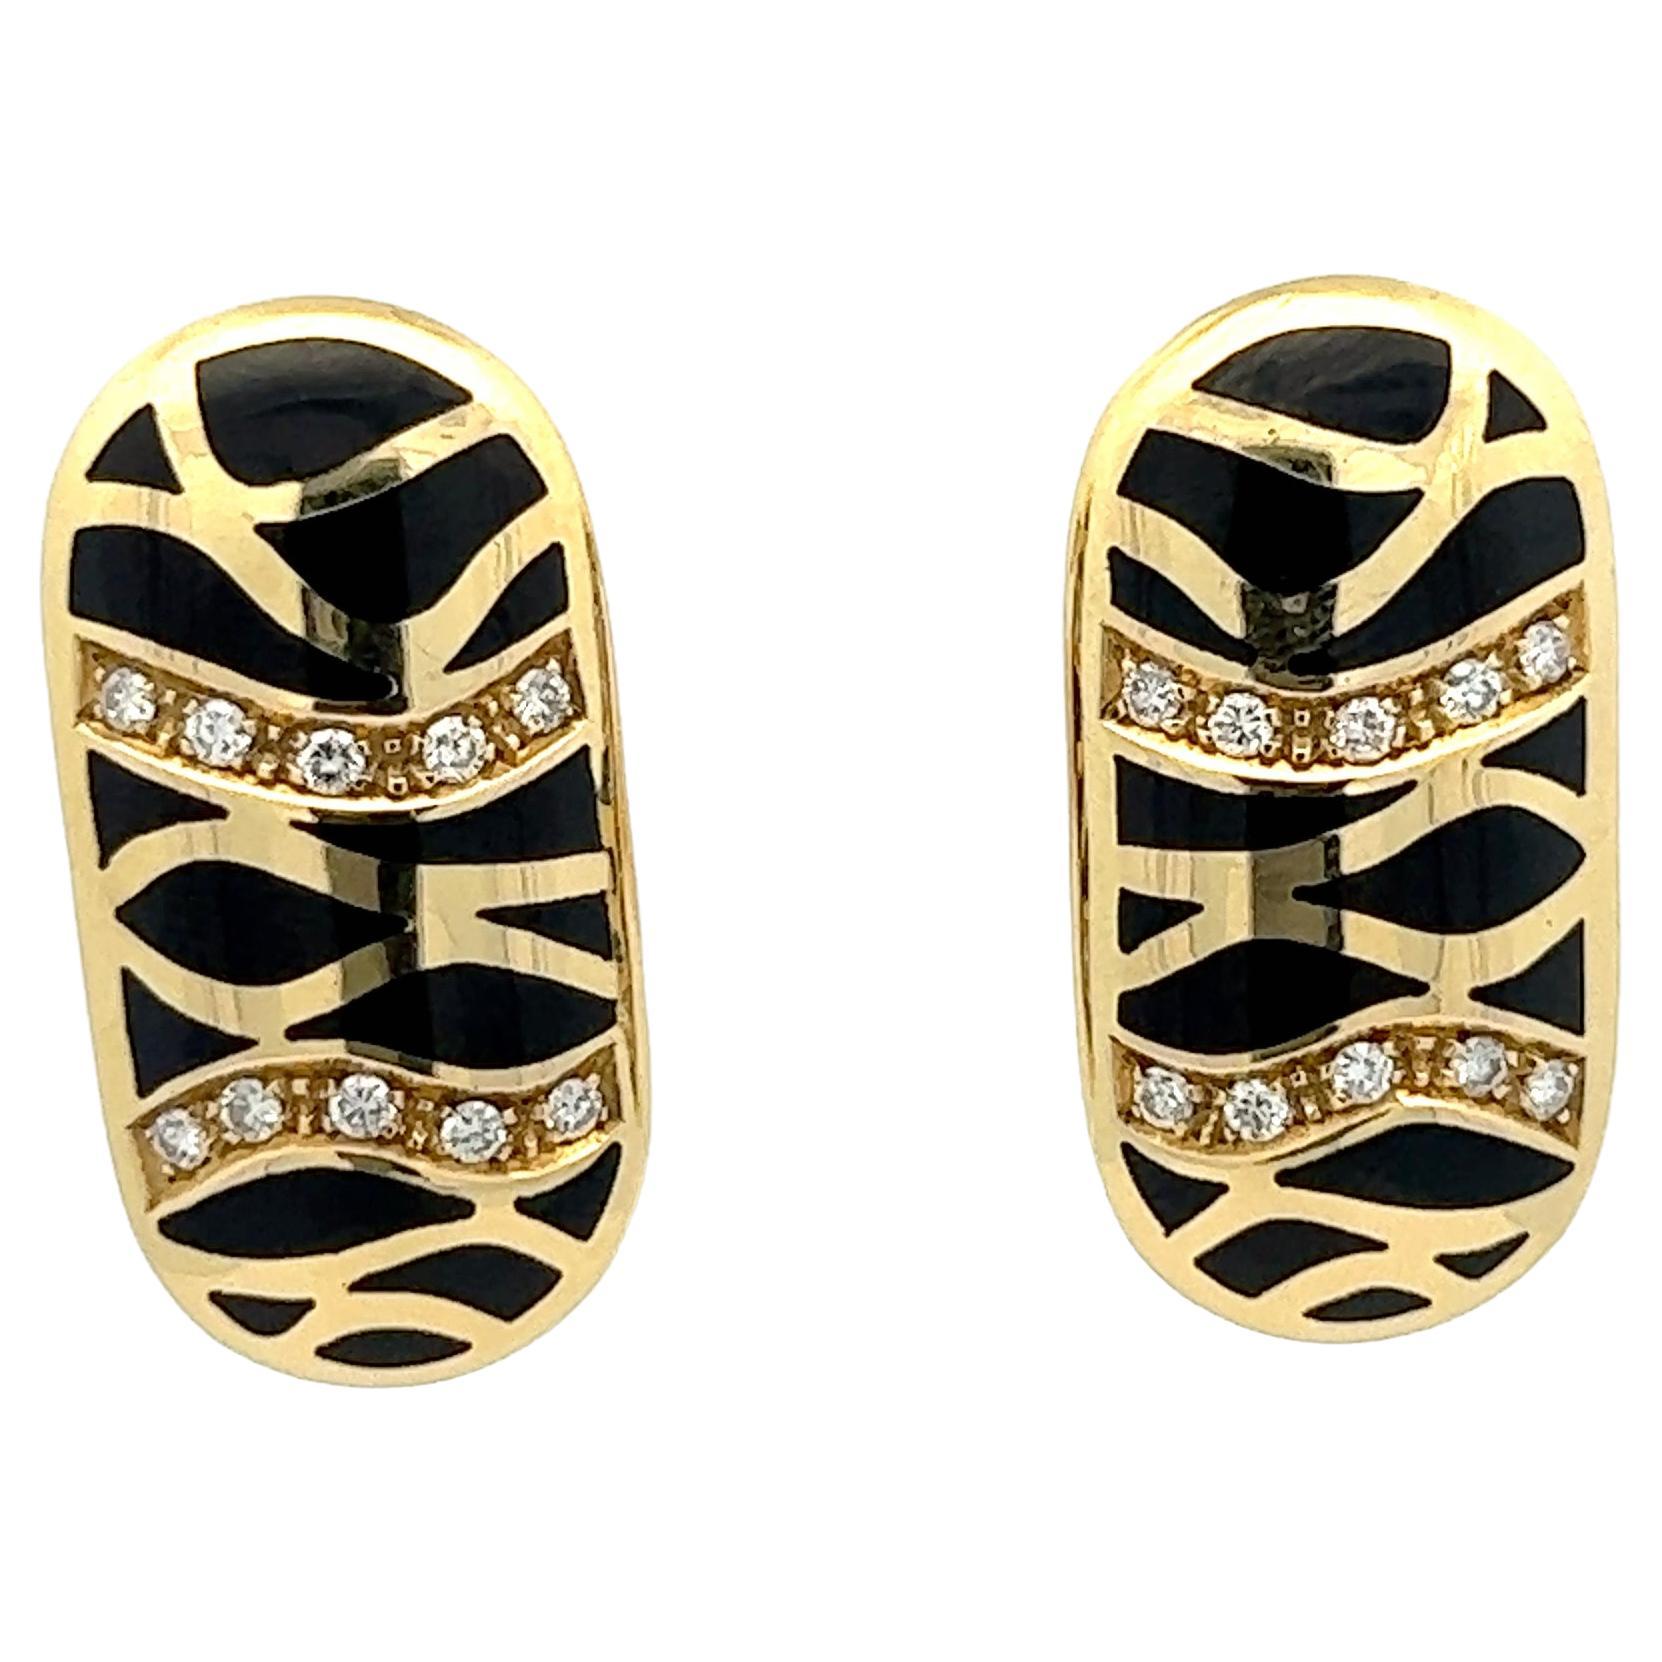 A pair of 18k yellow gold, Diamond and black enamel ear clips by Illario.